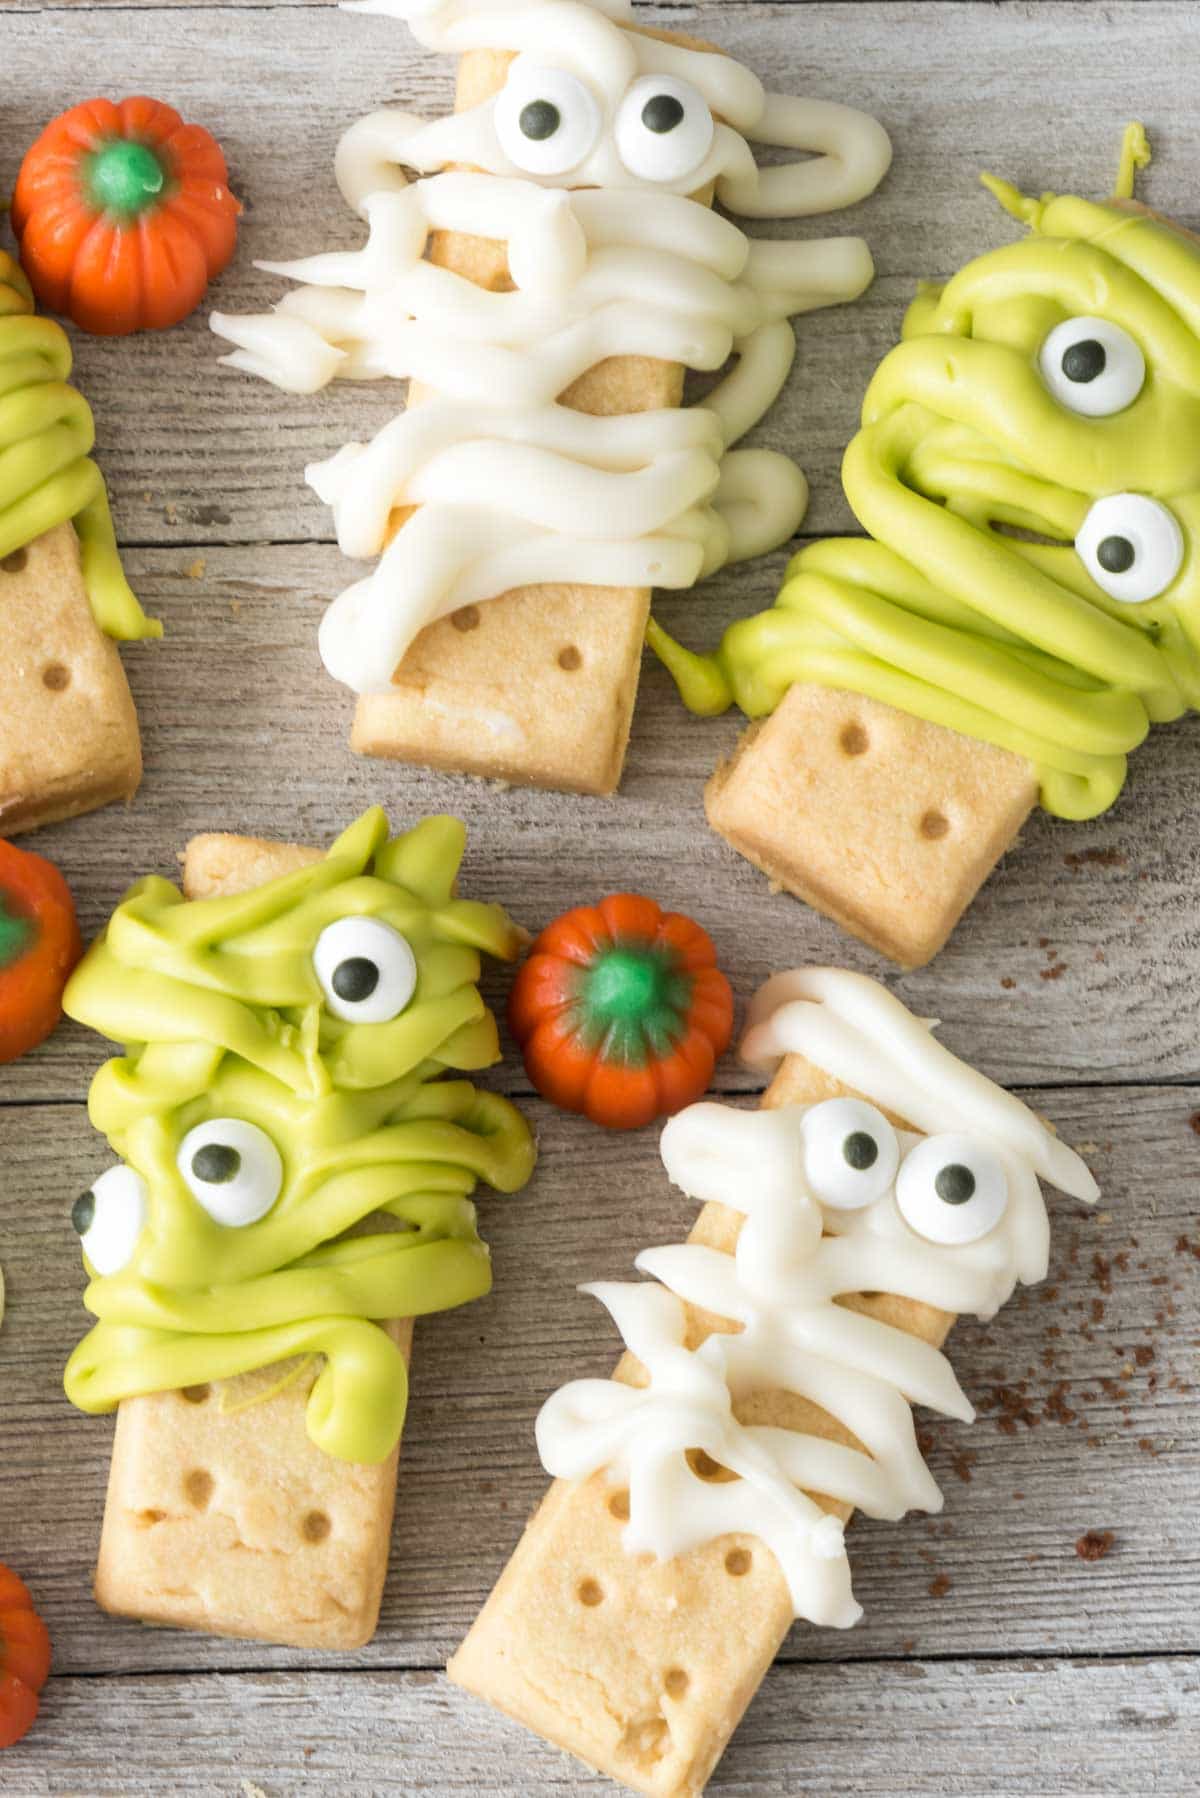 Monsters and Mummies made out of shortbread cookies and melted candy. The eyes make them so fun!